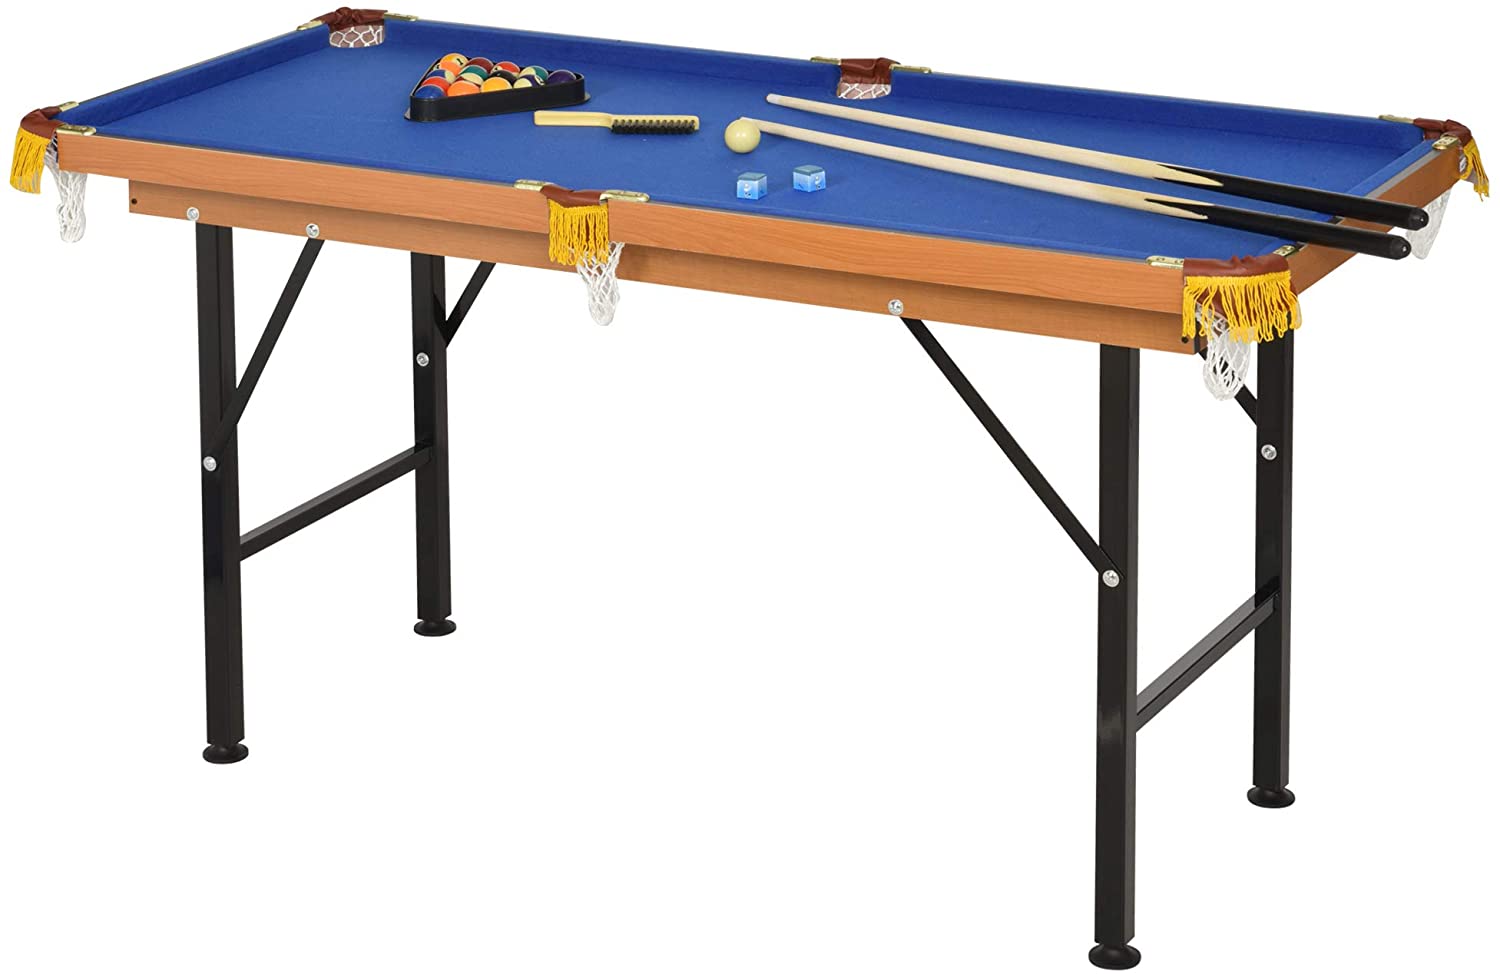 Soozier 55'' Portable Folding Billiards Table Game Pool Table for Kids Adults with Cues, Ball, Rack, Brush, Chalk